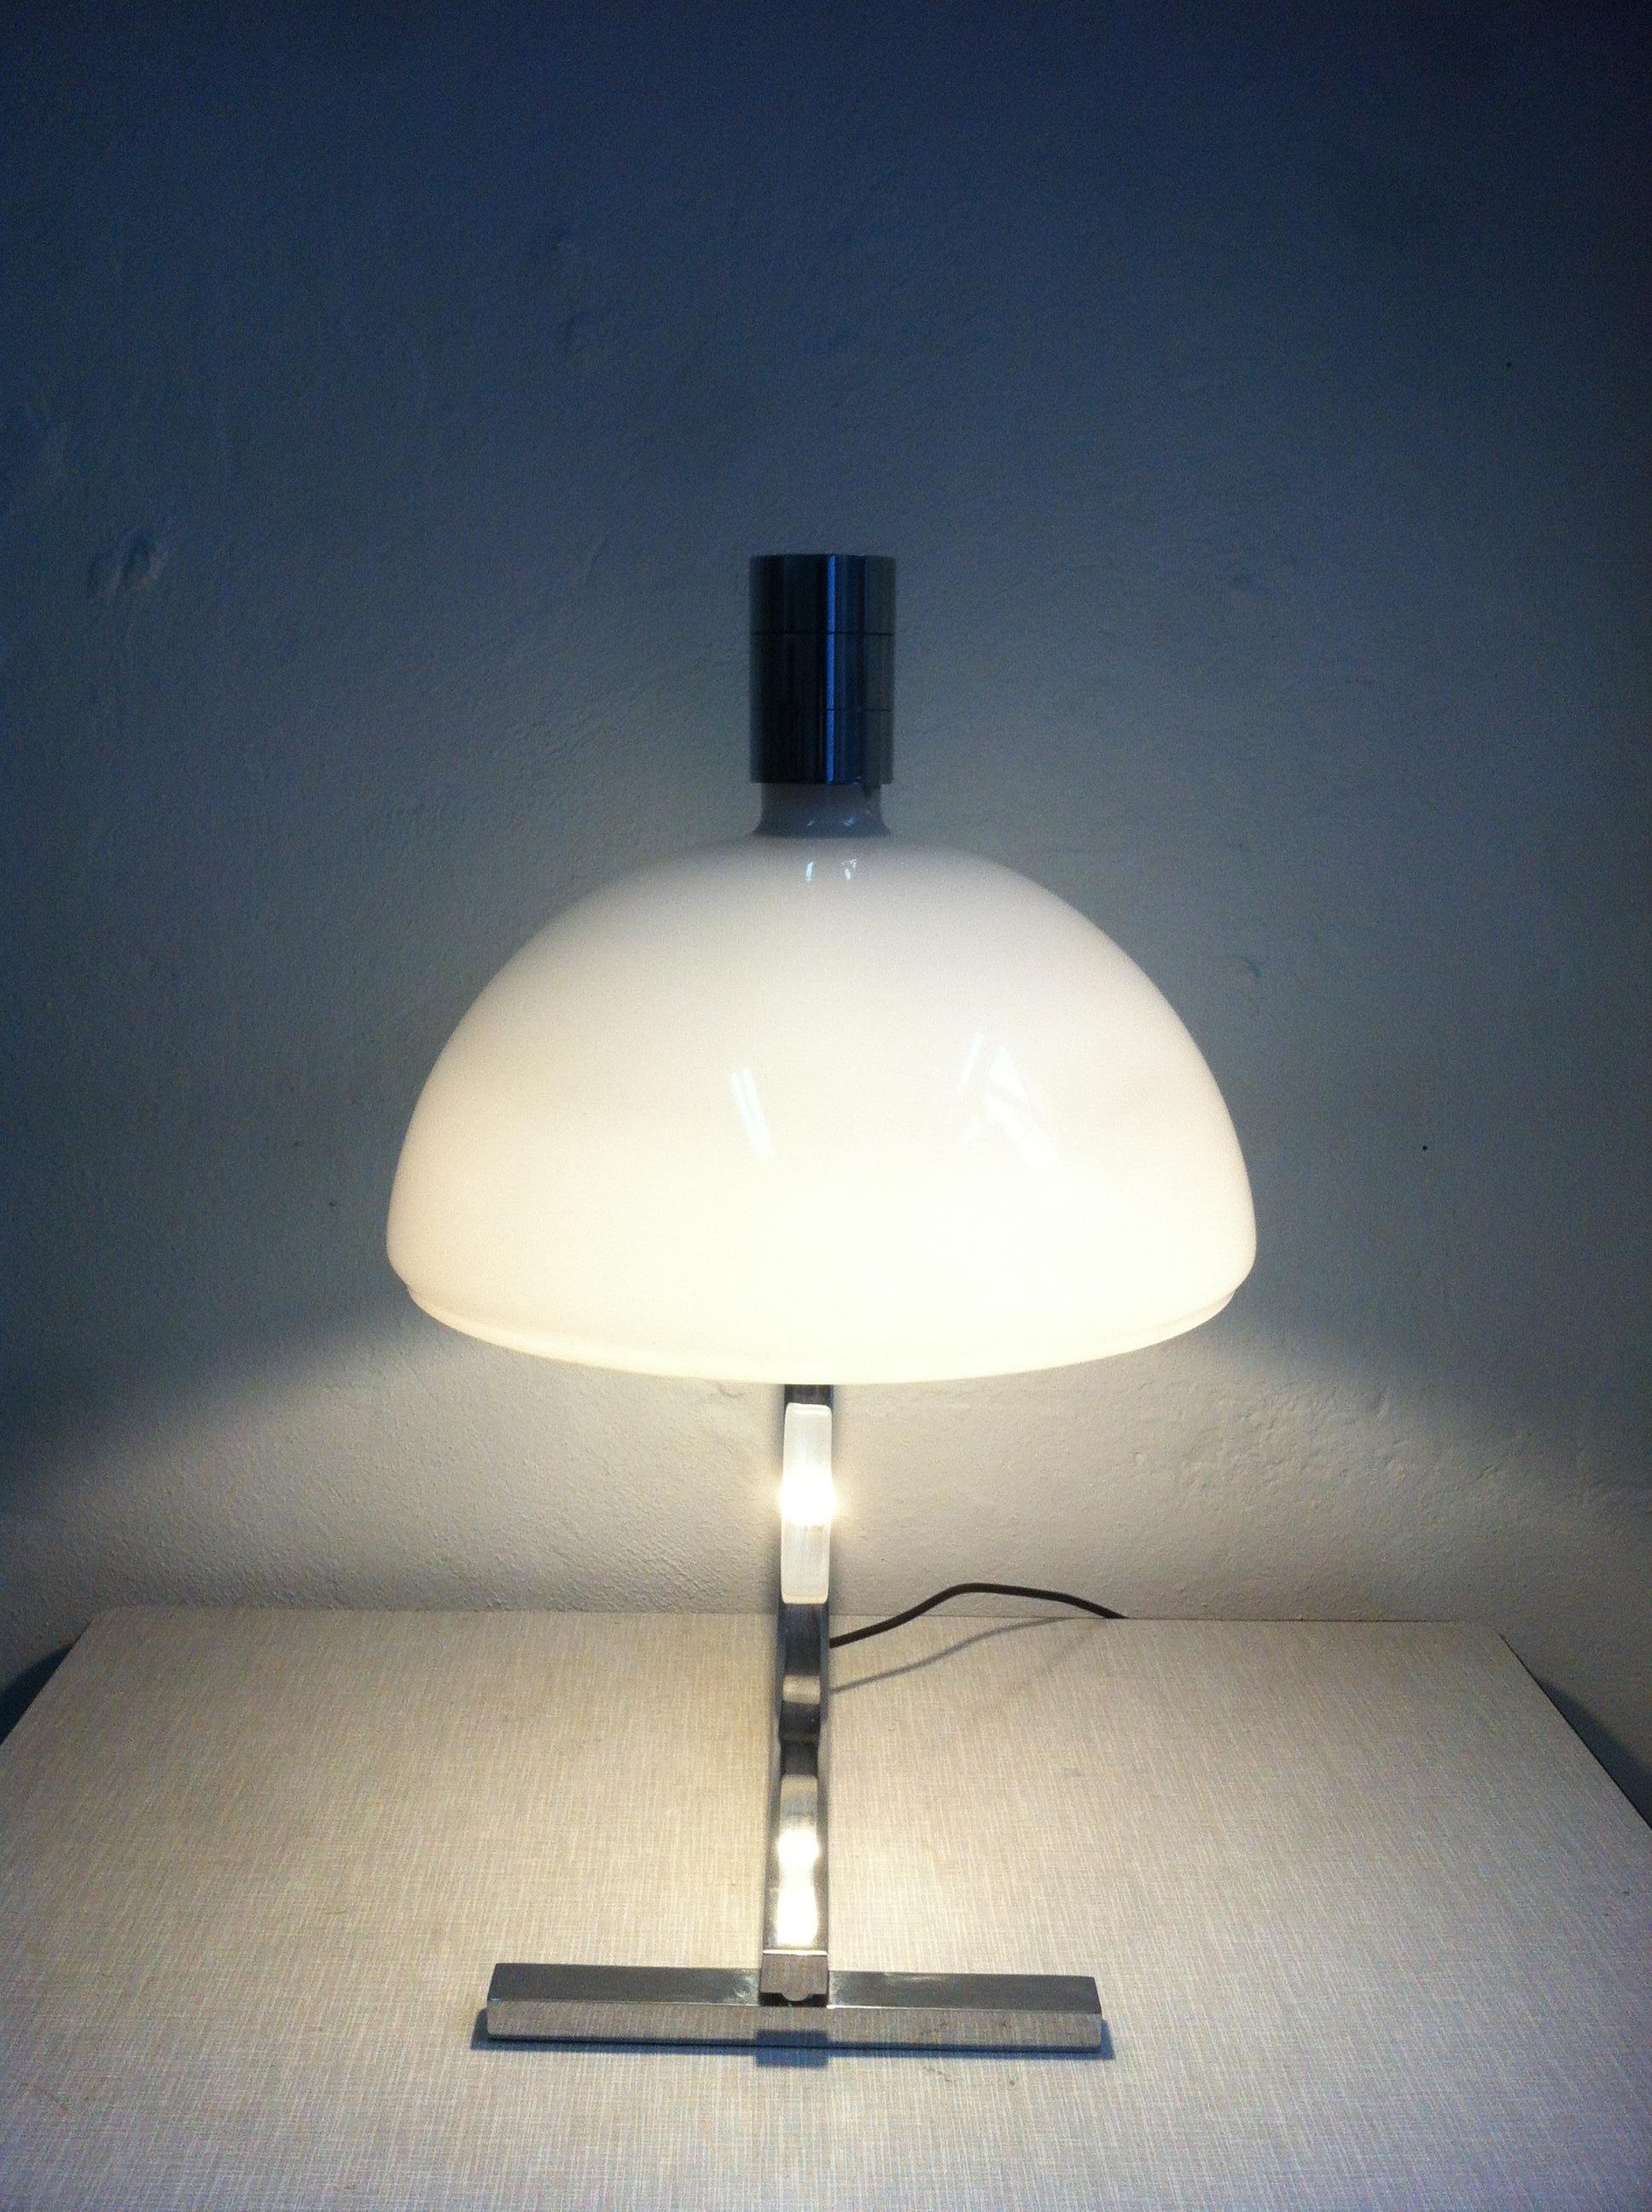 Mid-20th Century Midcentury AM/AS Table Lamp by Helg, Piva, and Albini for Sirrah Large, 1969 For Sale